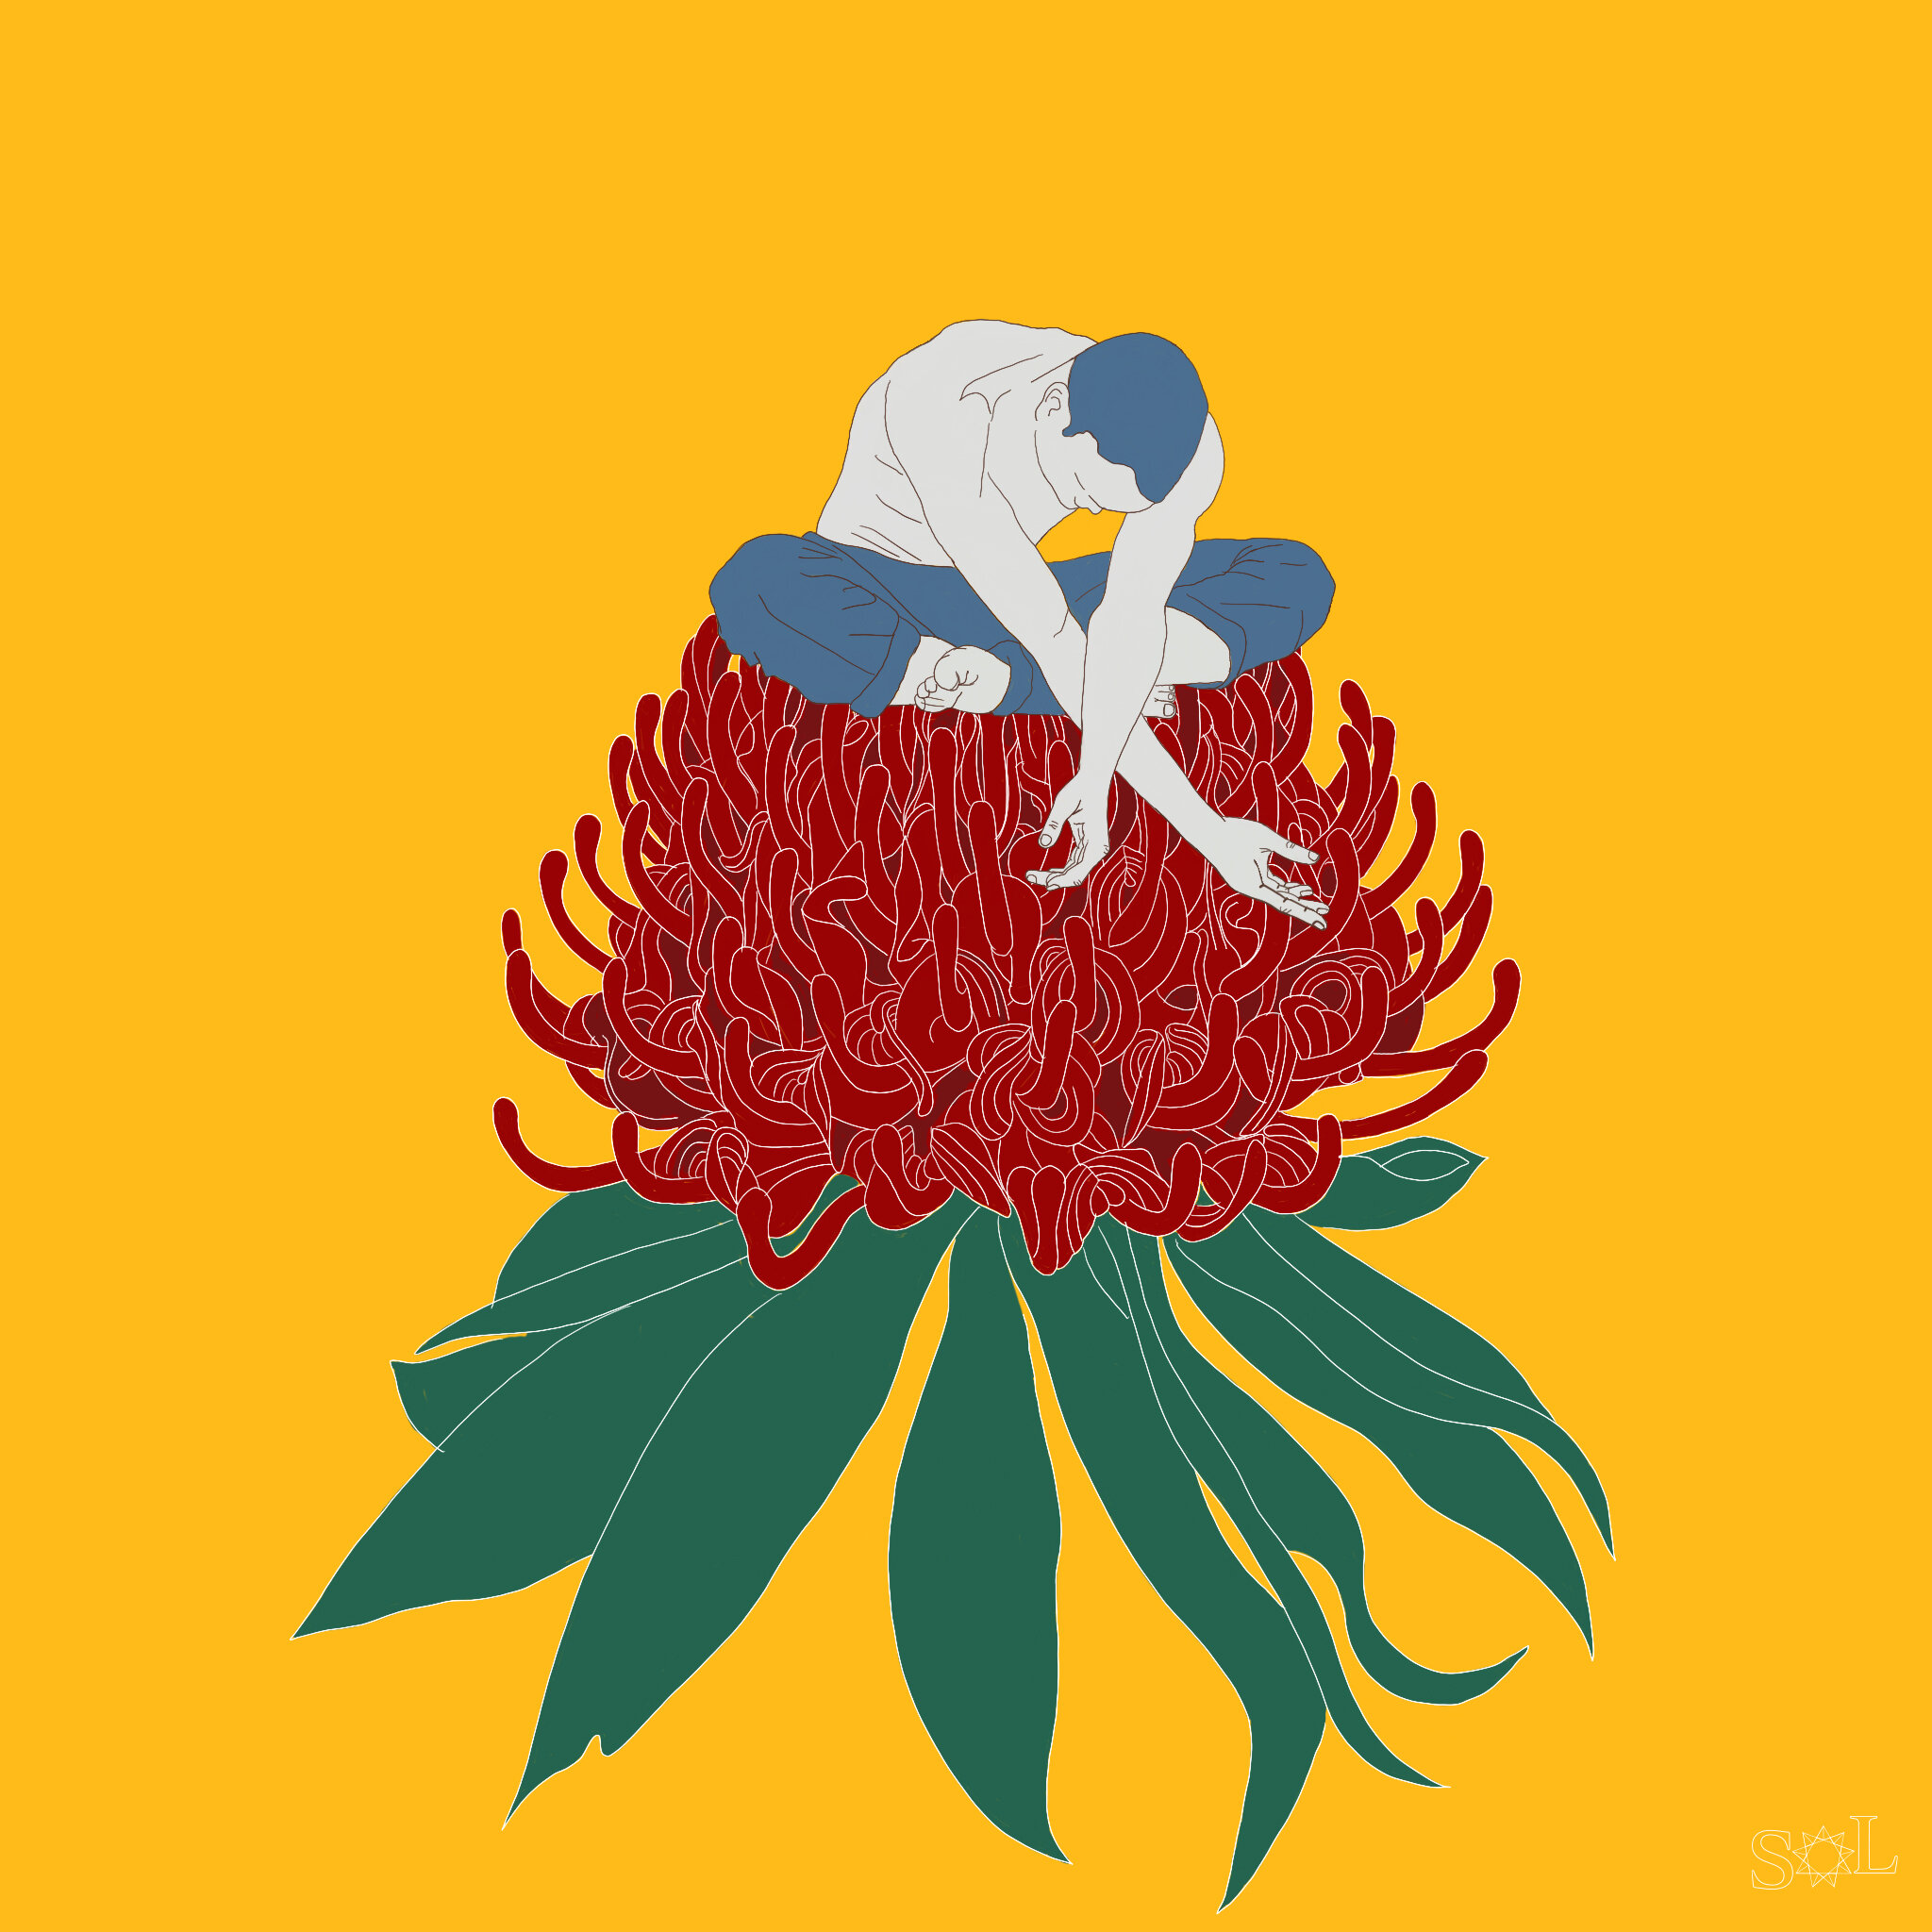 And_He_Told_His_Sorrows_To_The_Waratah.jpg